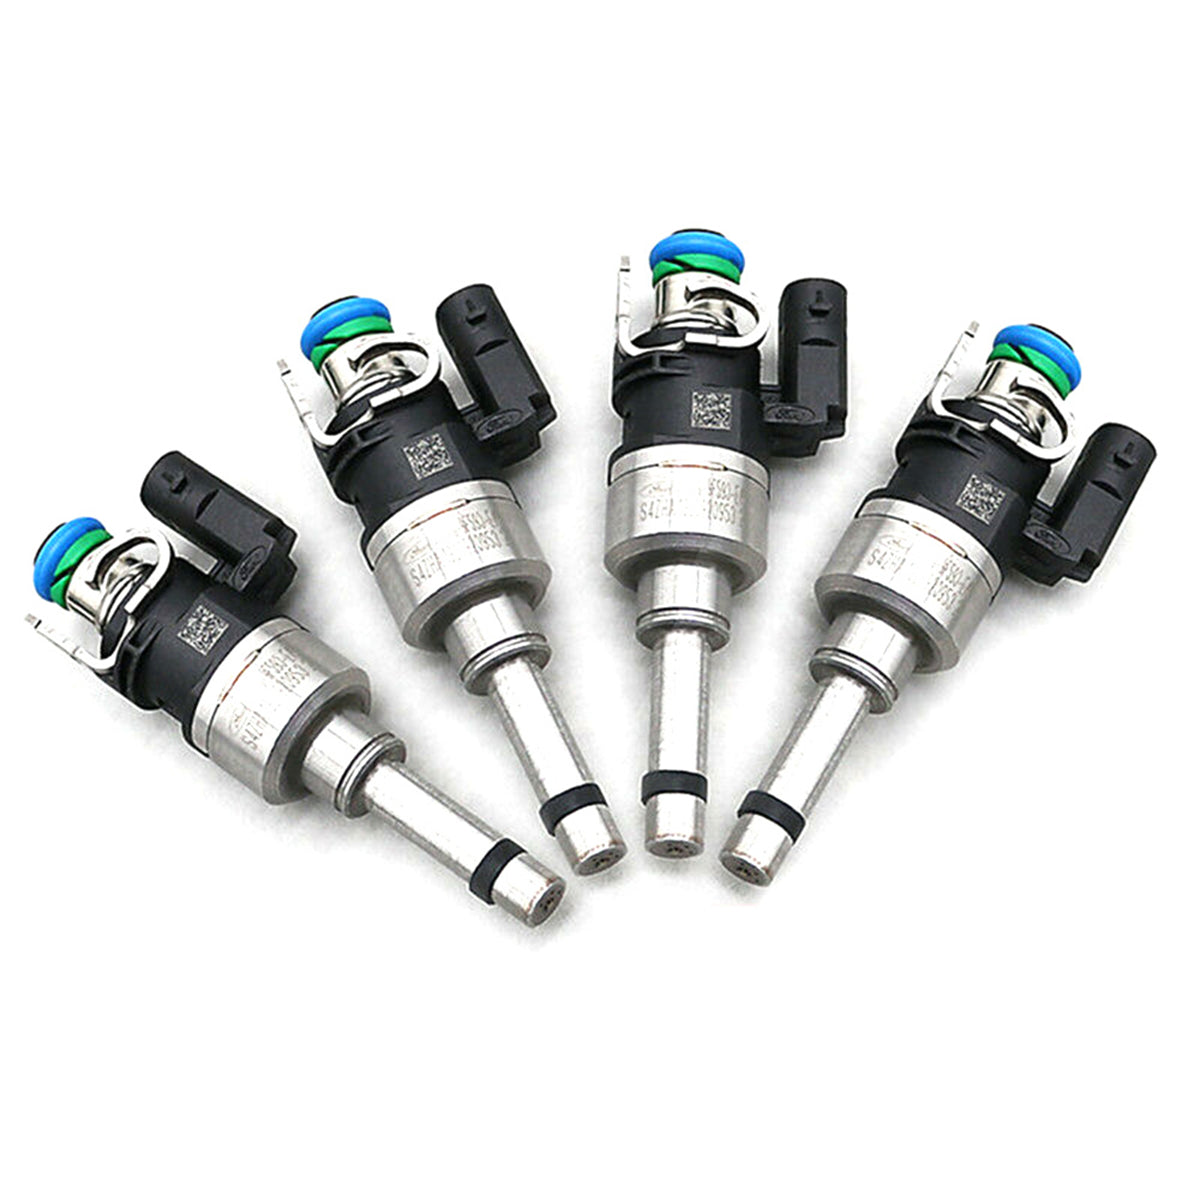 Fuel Injector DS7Z-9F593-DA, Fuel Injector for 2014-2020 Ford Escape Fusion, Car Fuel Injector, Daysyore Fuel Injector, Auto Fuel Injector